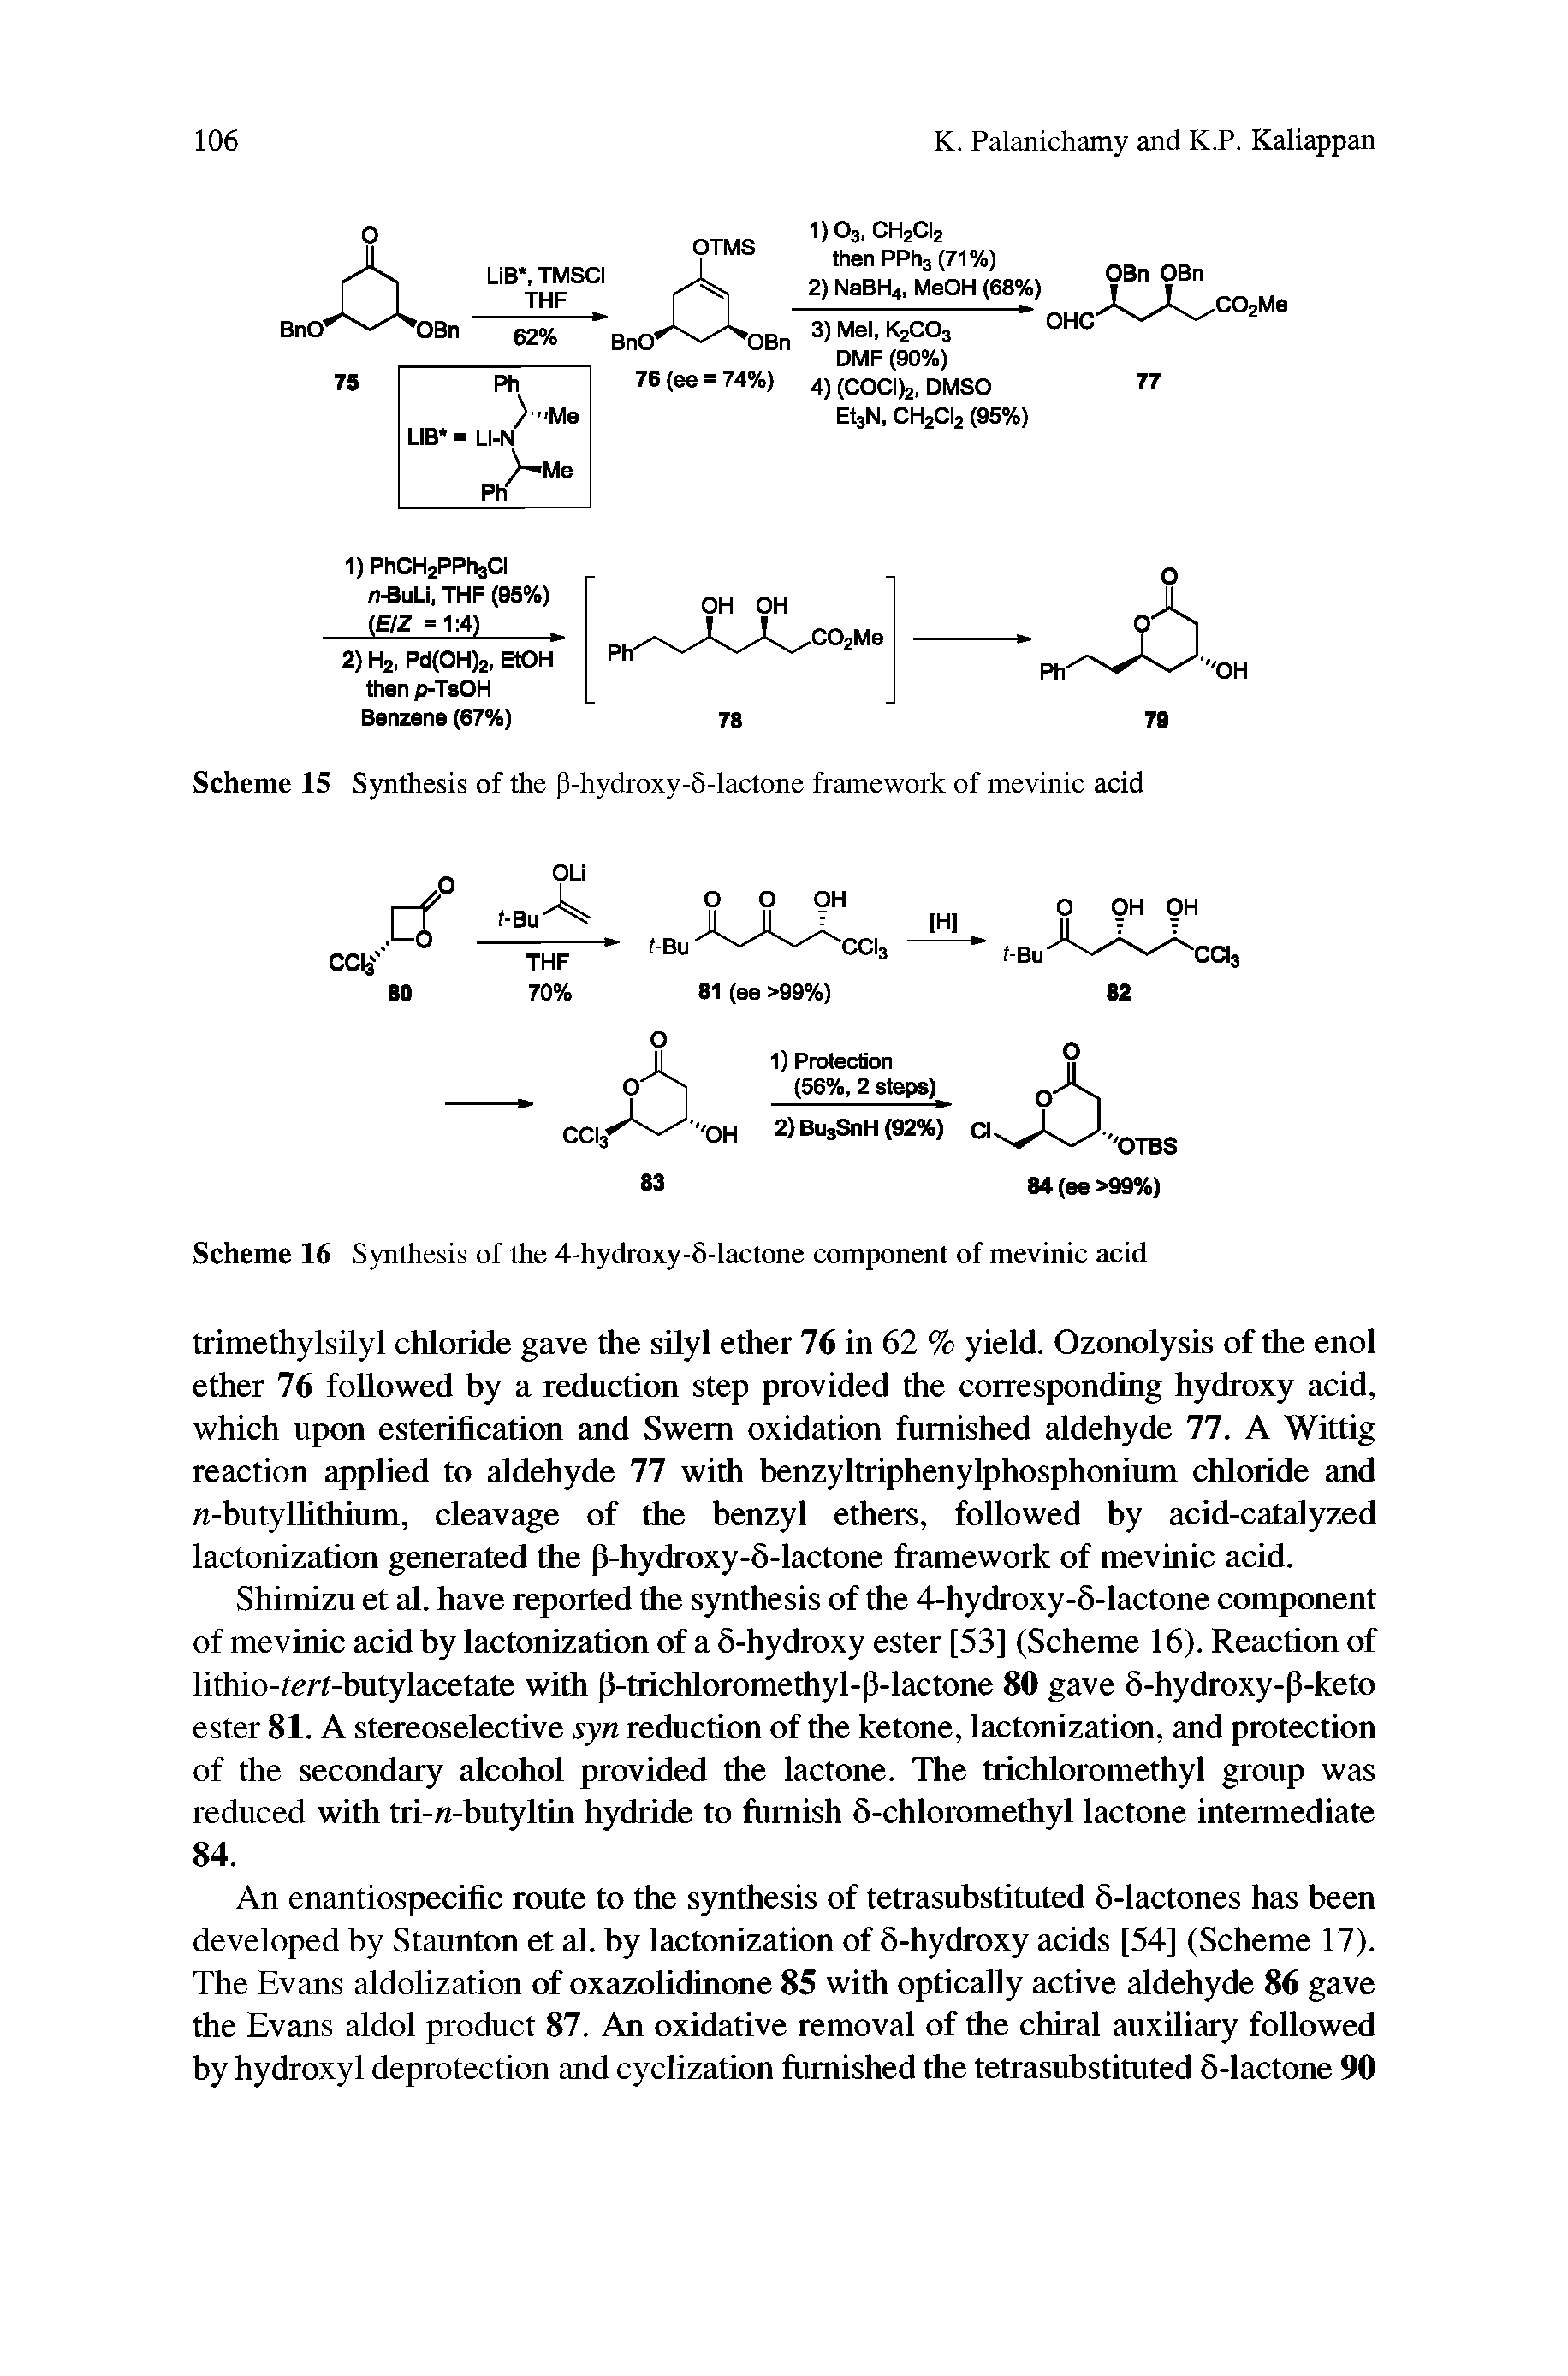 Scheme 15 Synthesis of the p-hydroxy-6-lactone framework of mevinic acid...